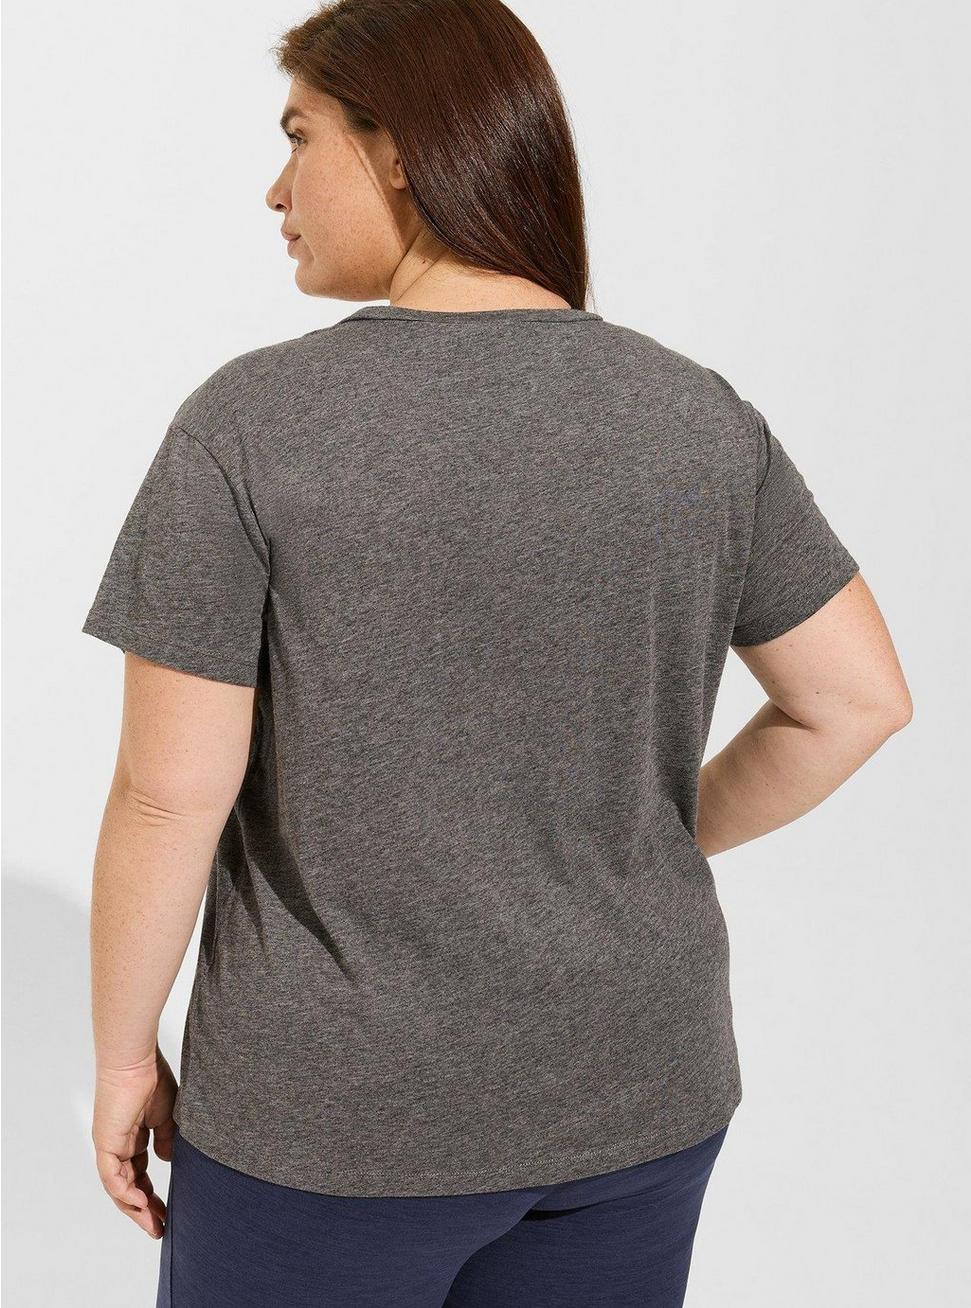 Plus Size - Happy Camper Performance Cotton Short Sleeve Active Tee ...